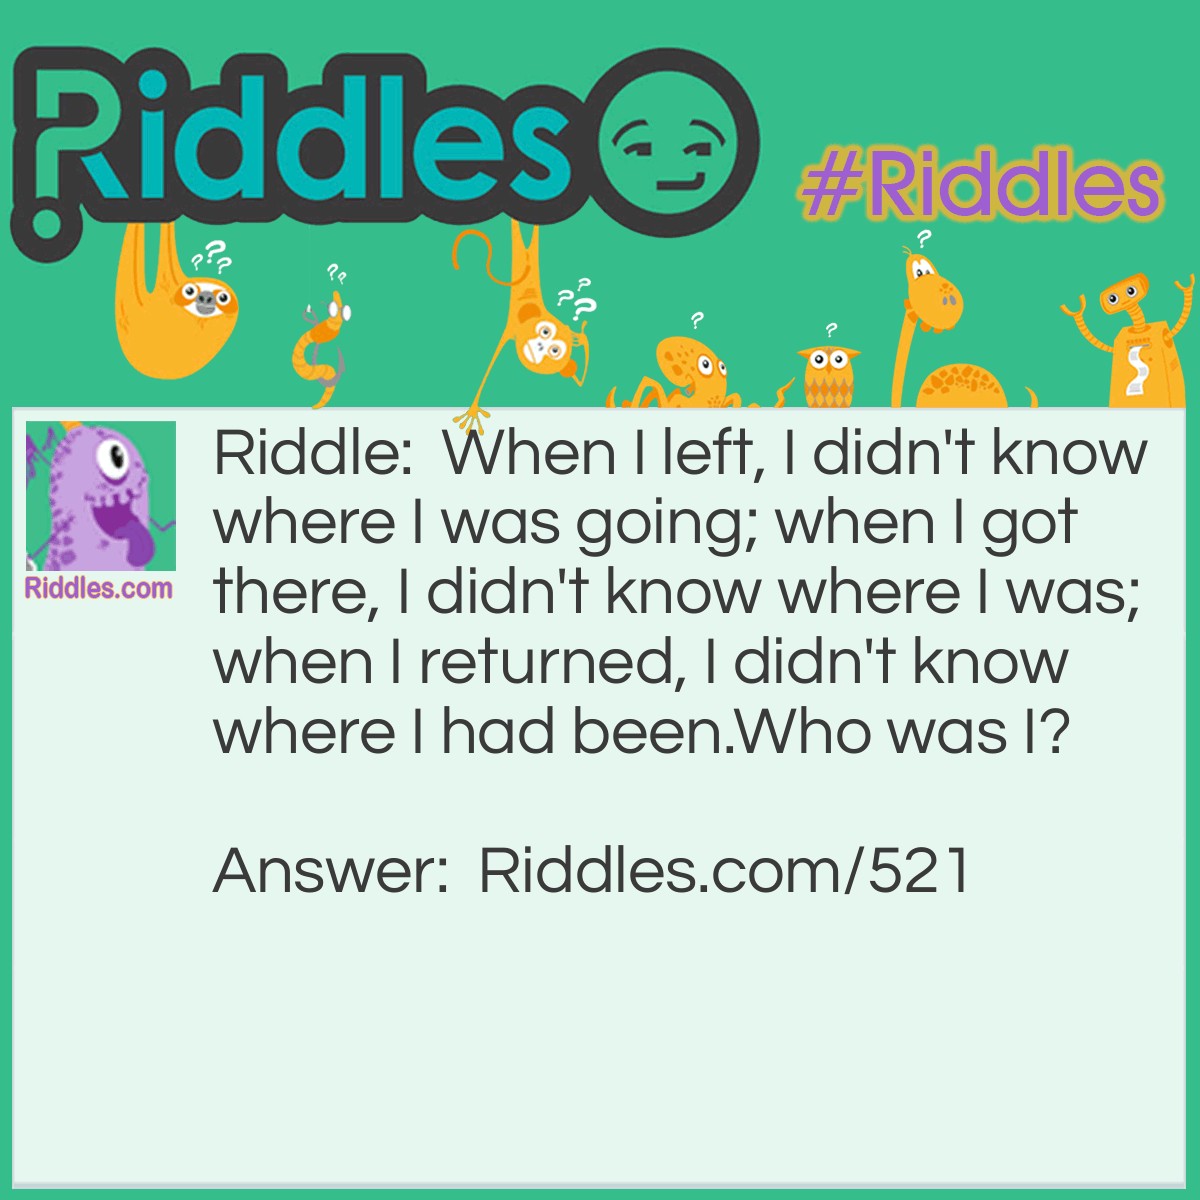 Riddle: When I left, I didn't know where I was going; when I got there, I didn't know where I was; when I returned, I didn't know where I had been.
Who was I? Answer: Christopher Columbus - when he found the Americas.